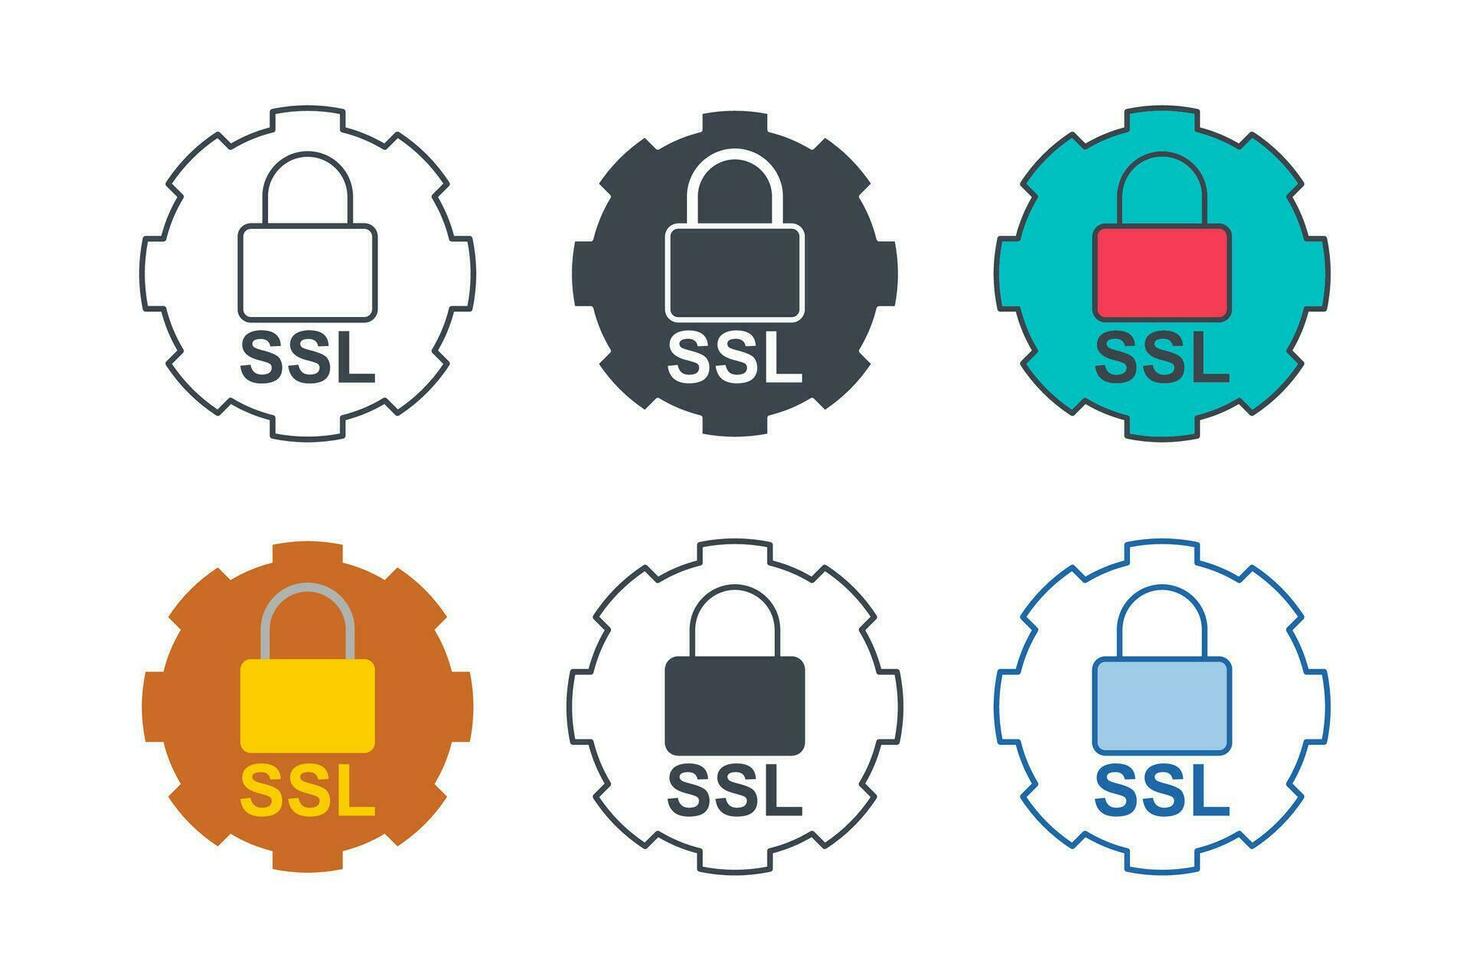 SSL icon collection with different styles. Secure connection icon symbol vector illustration isolated on white background